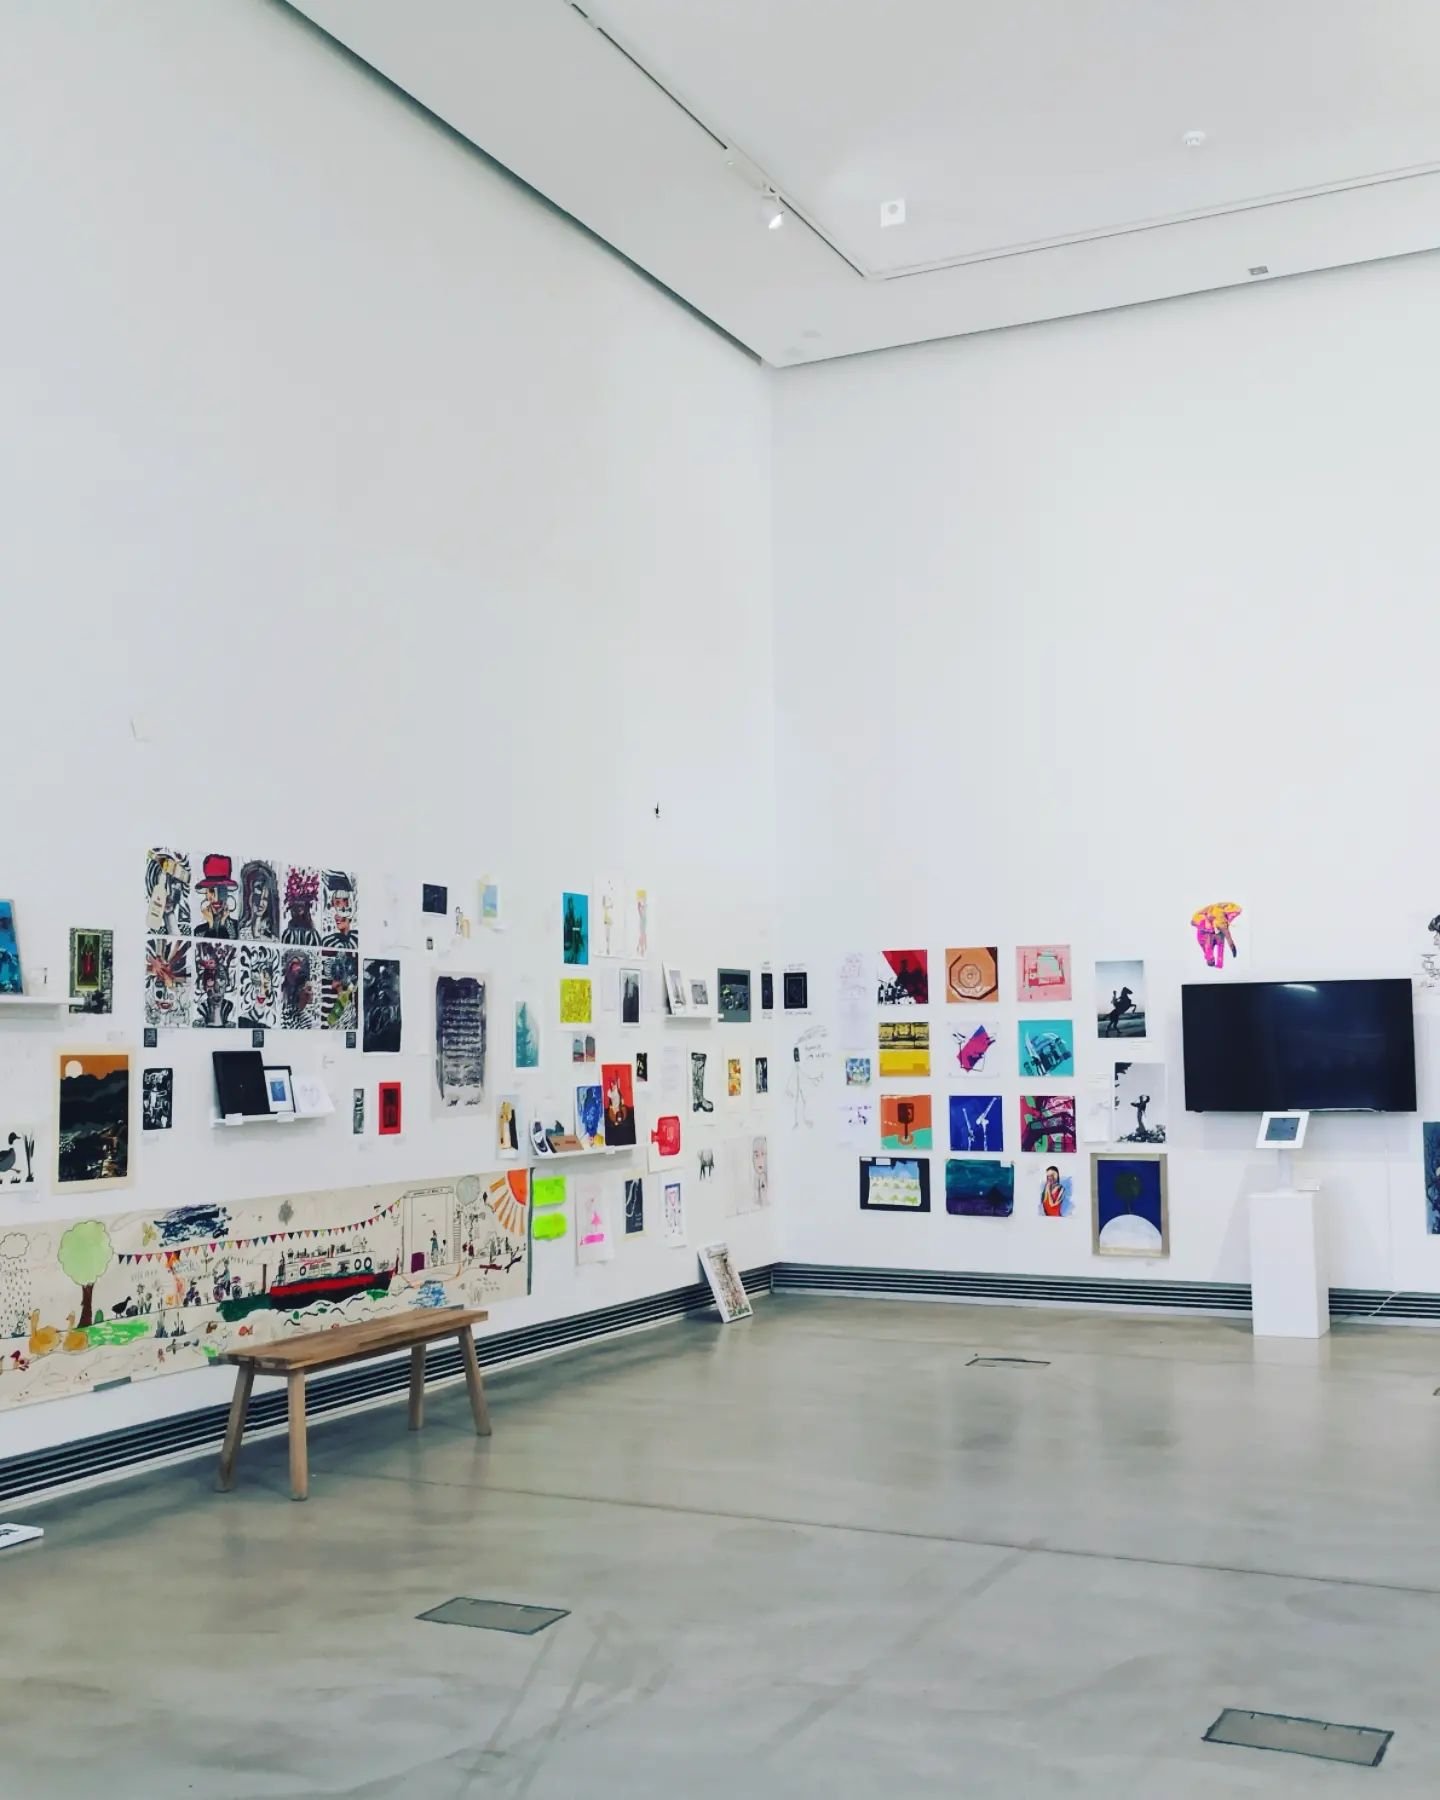 @edinburghprintmakers  have created a space for a unique show 'Whose gallery is it anyway?'
Feel free to take along a piece of artwork, put it up...... move artwork around and curate your own piece of space.... lots of ideas taking shape and morphing